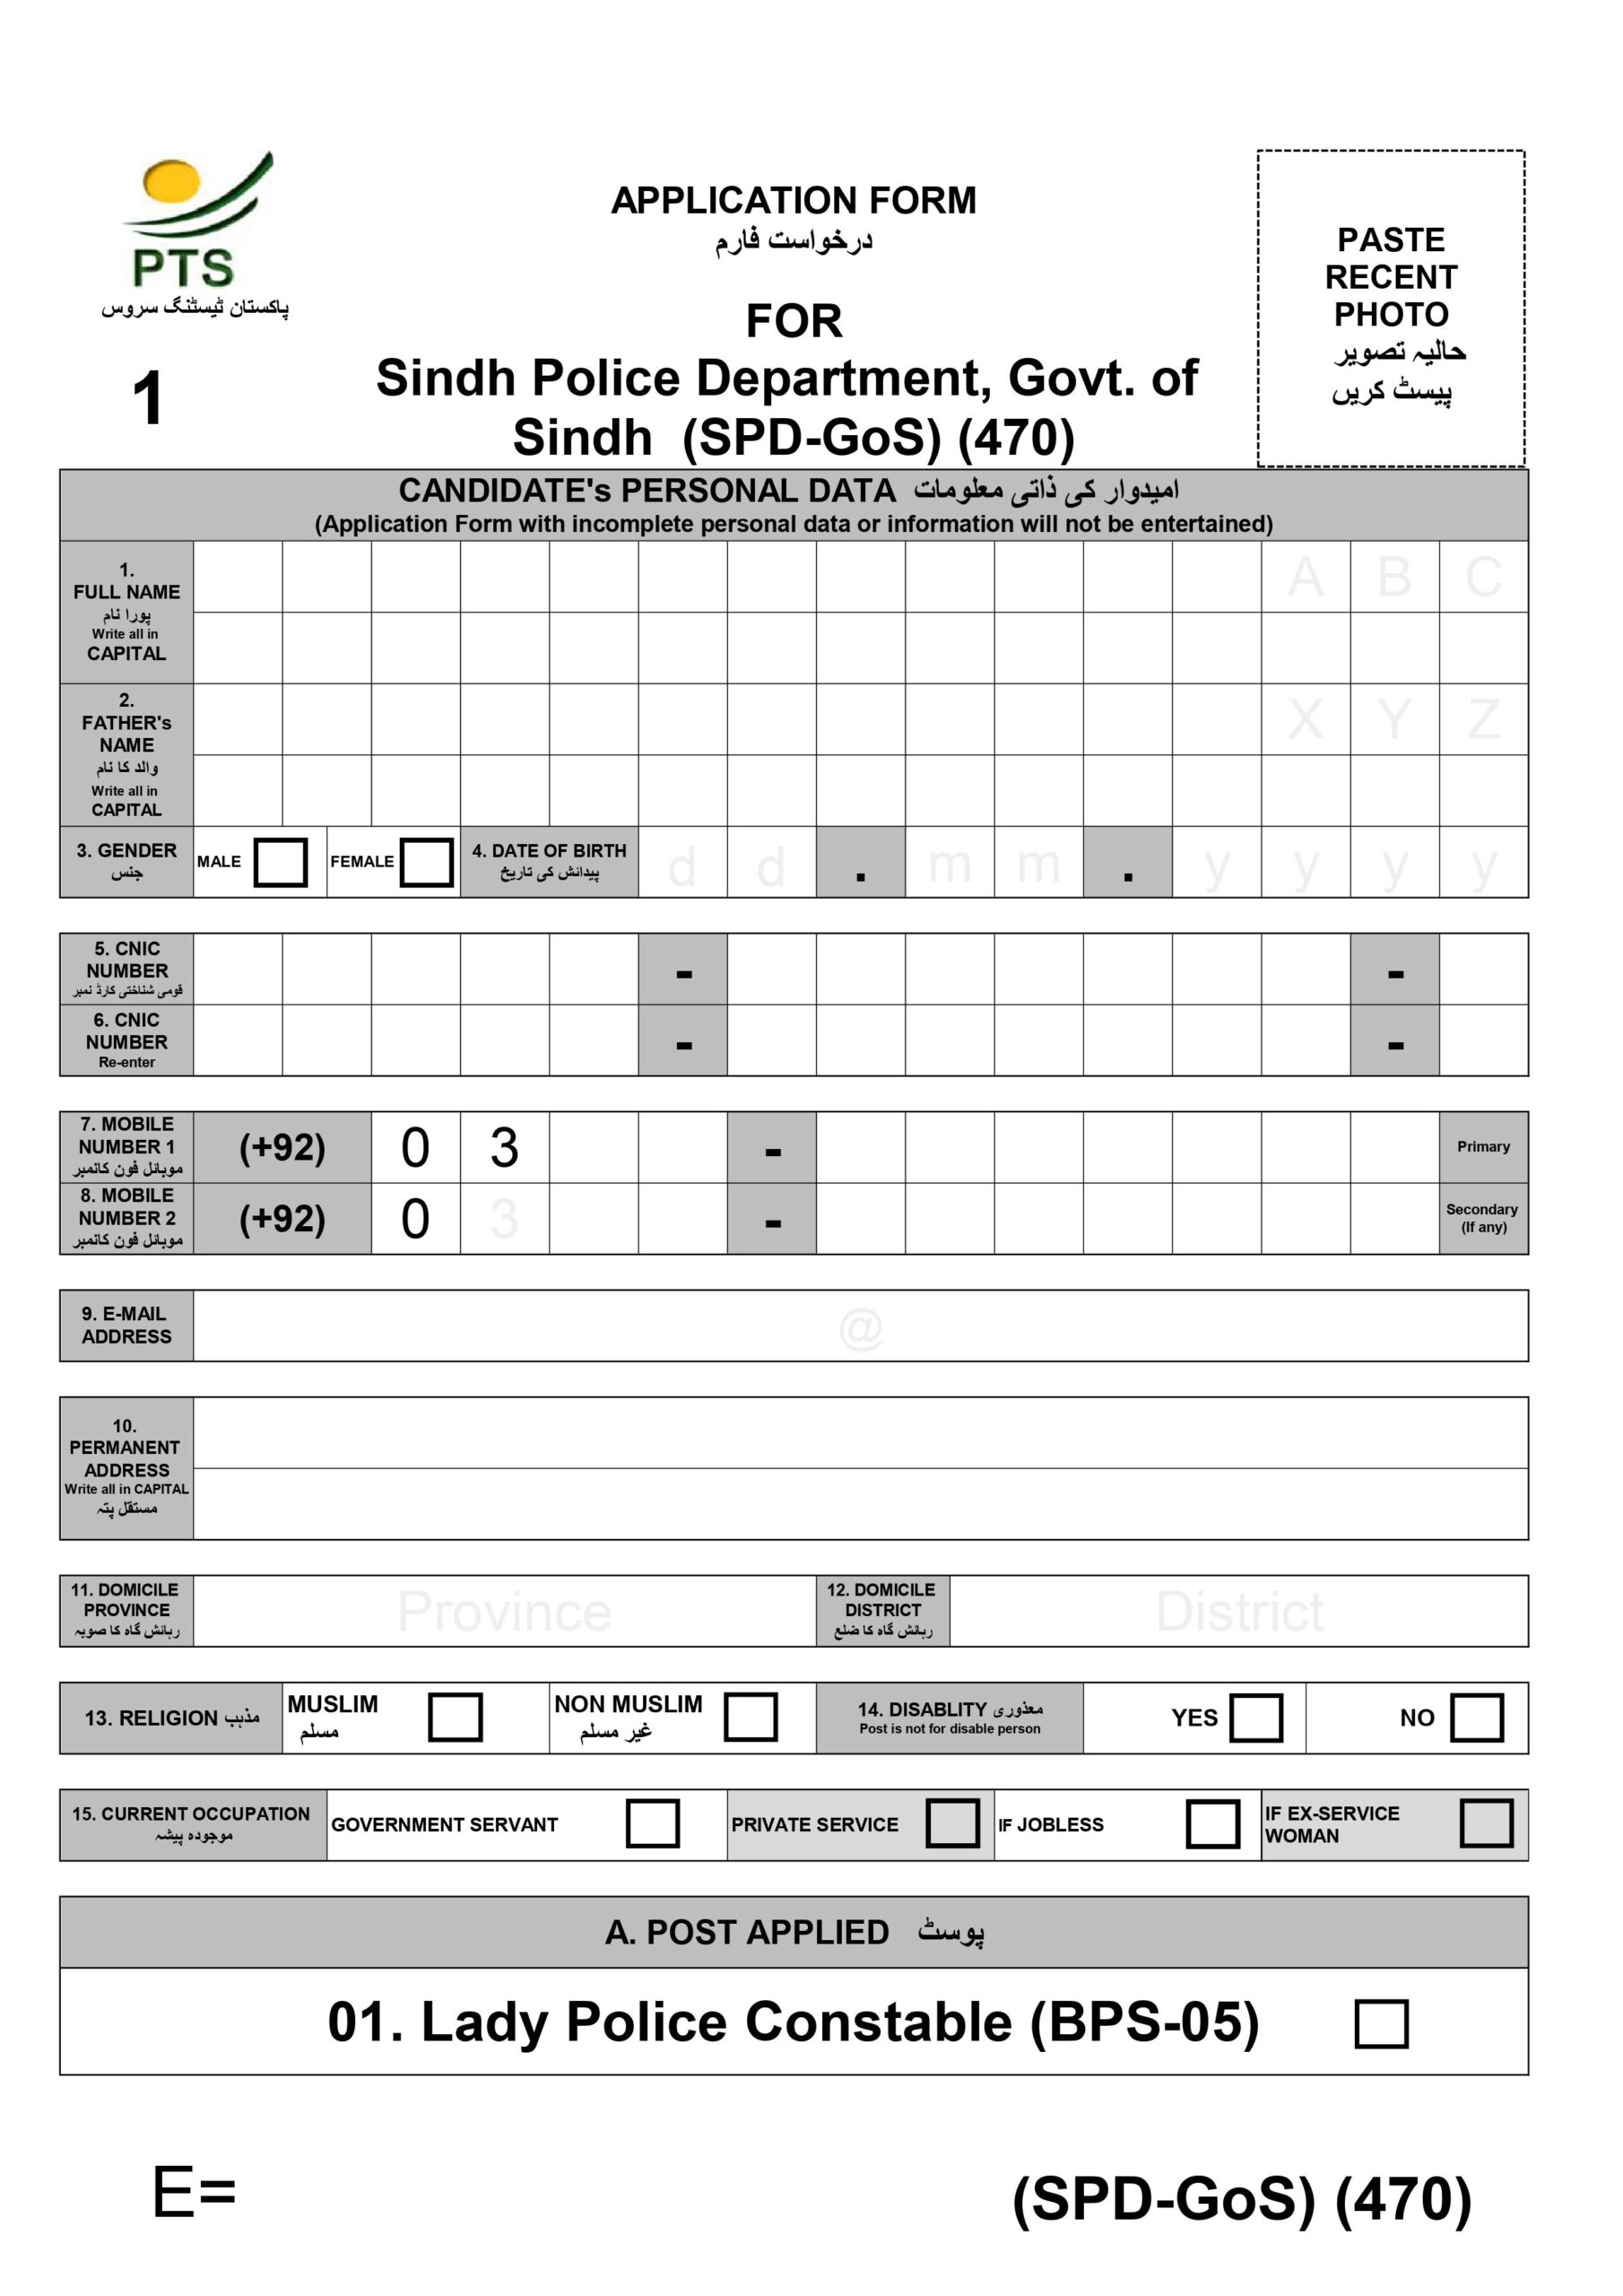 PTS Sindh Police Lady Constable Job Application Form